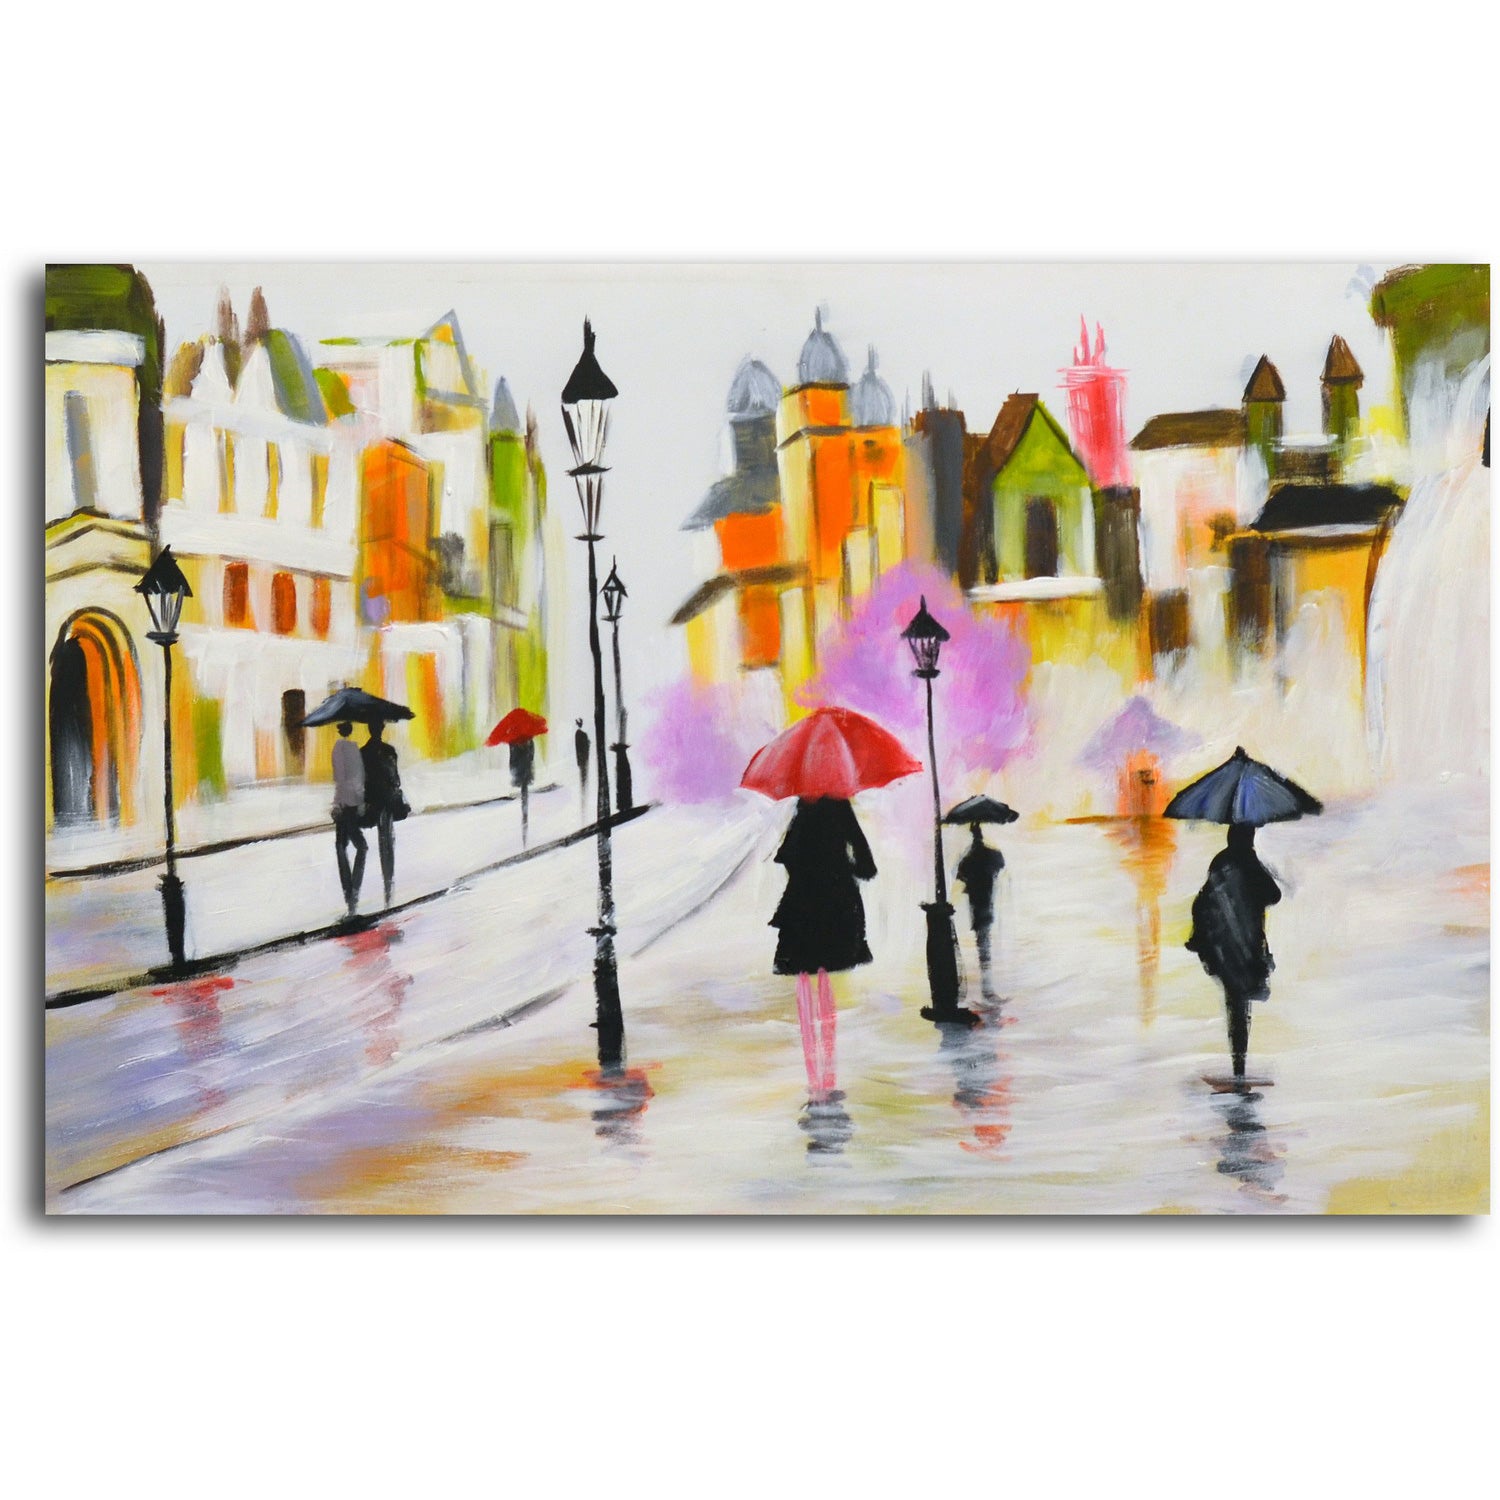 "A Walk in the Rain" Original painting on canvas - Set of 2